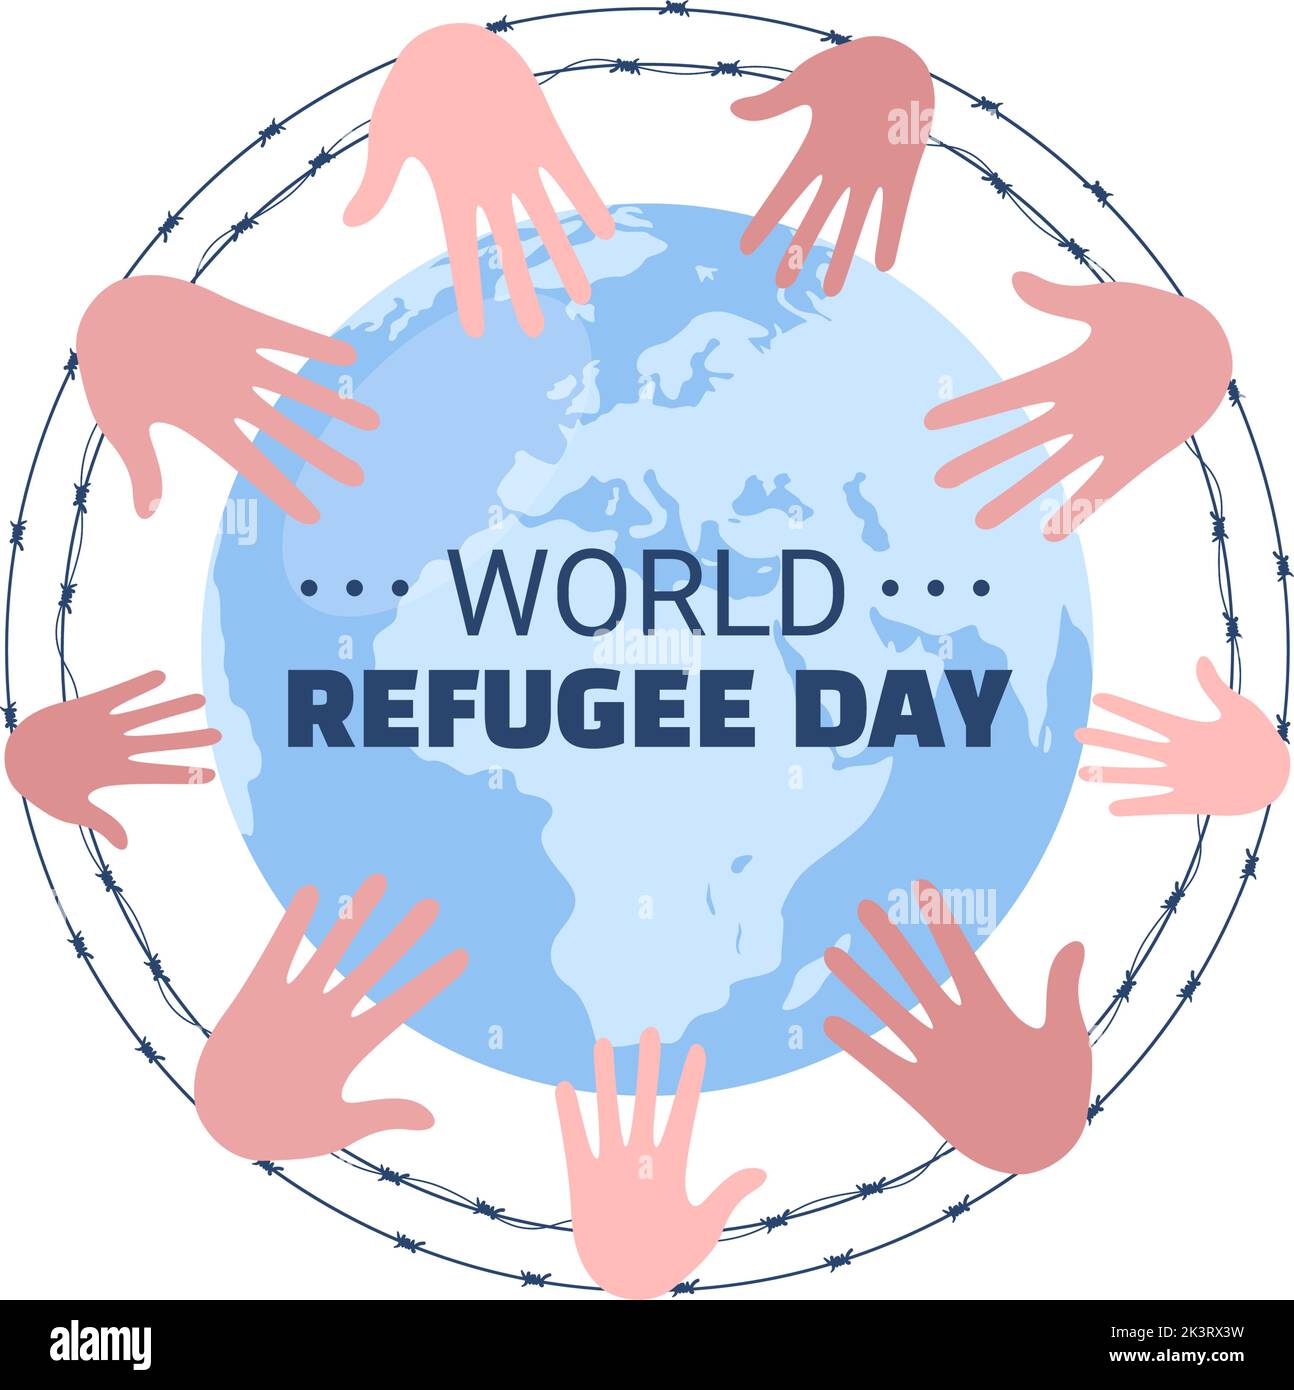 World Refugee Day Template Hand Drawn Cartoon Flat Illustration with Hands, Family and Climb Barbed Wire Fence to Immigrate to Save Place Stock Vector